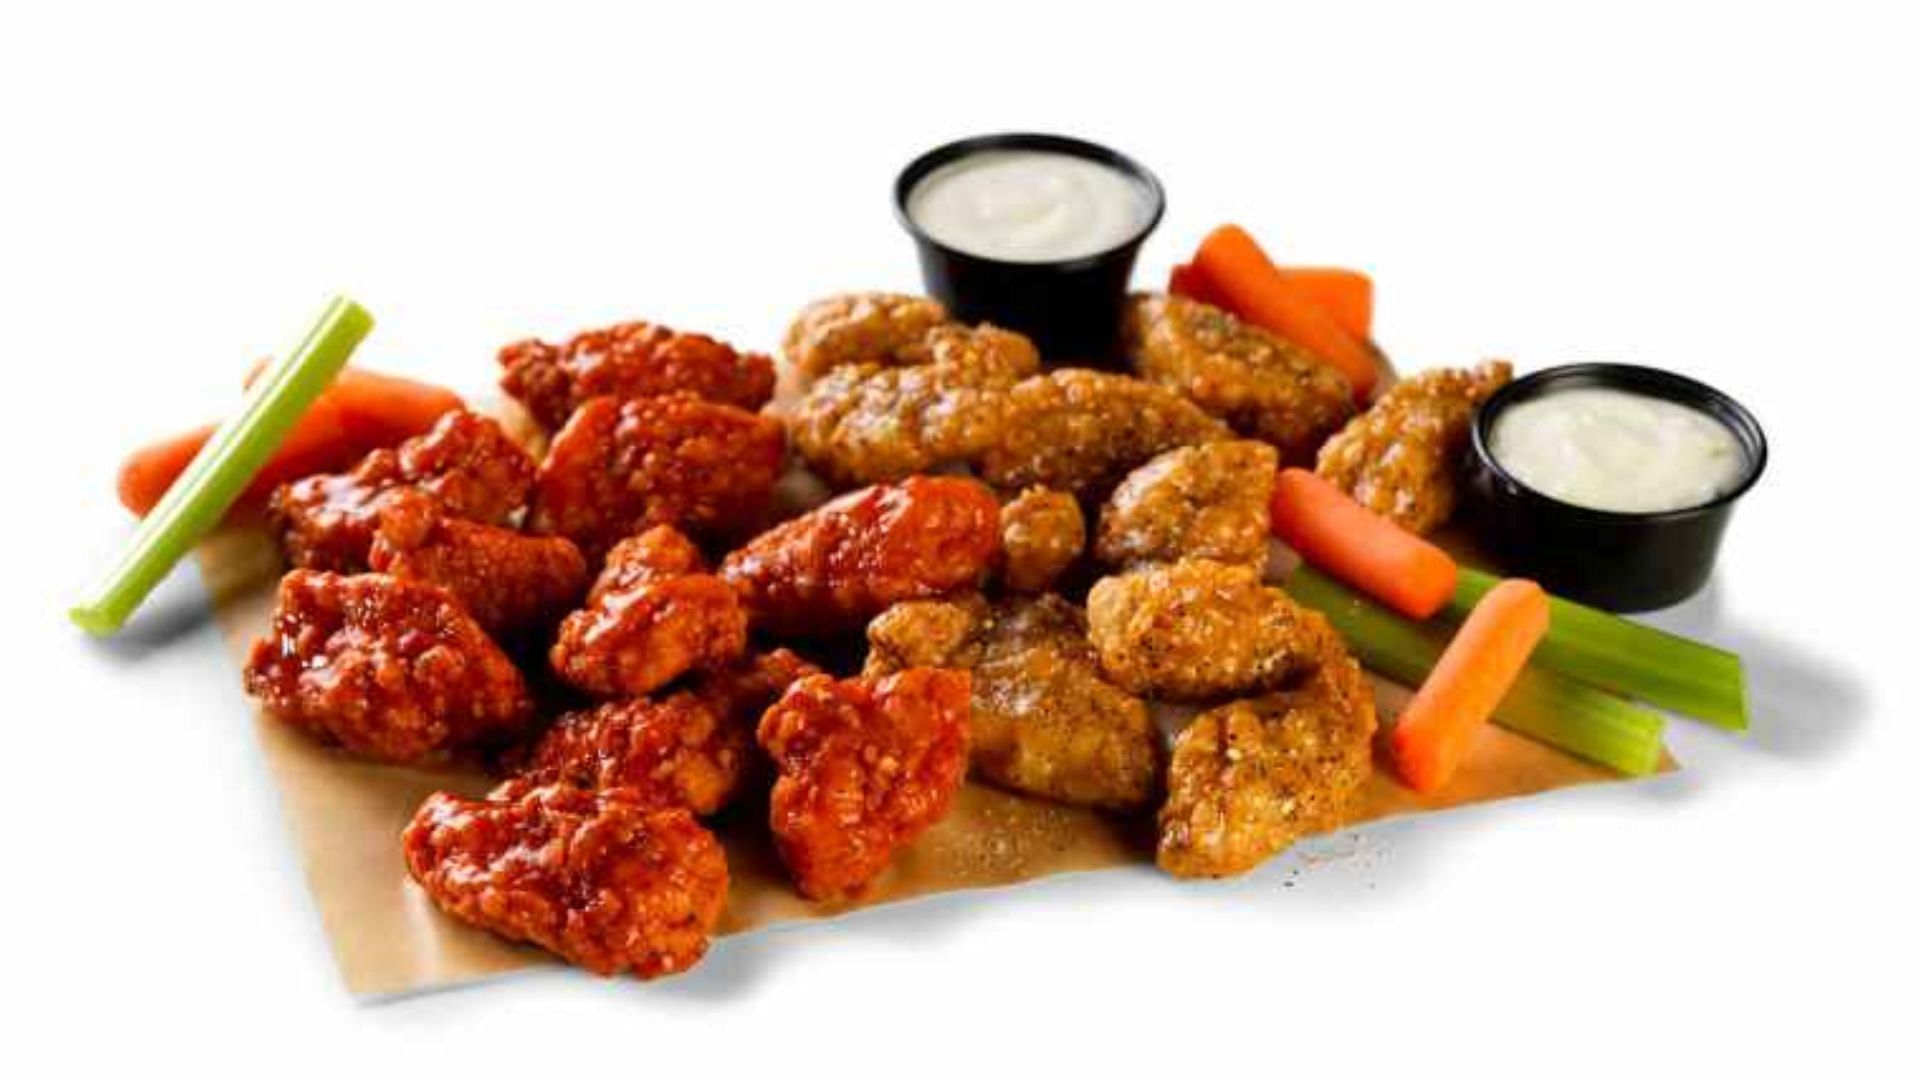 the said boneless wings in question reagrading the lawsuit (Image via Buffalo Wild Wings)